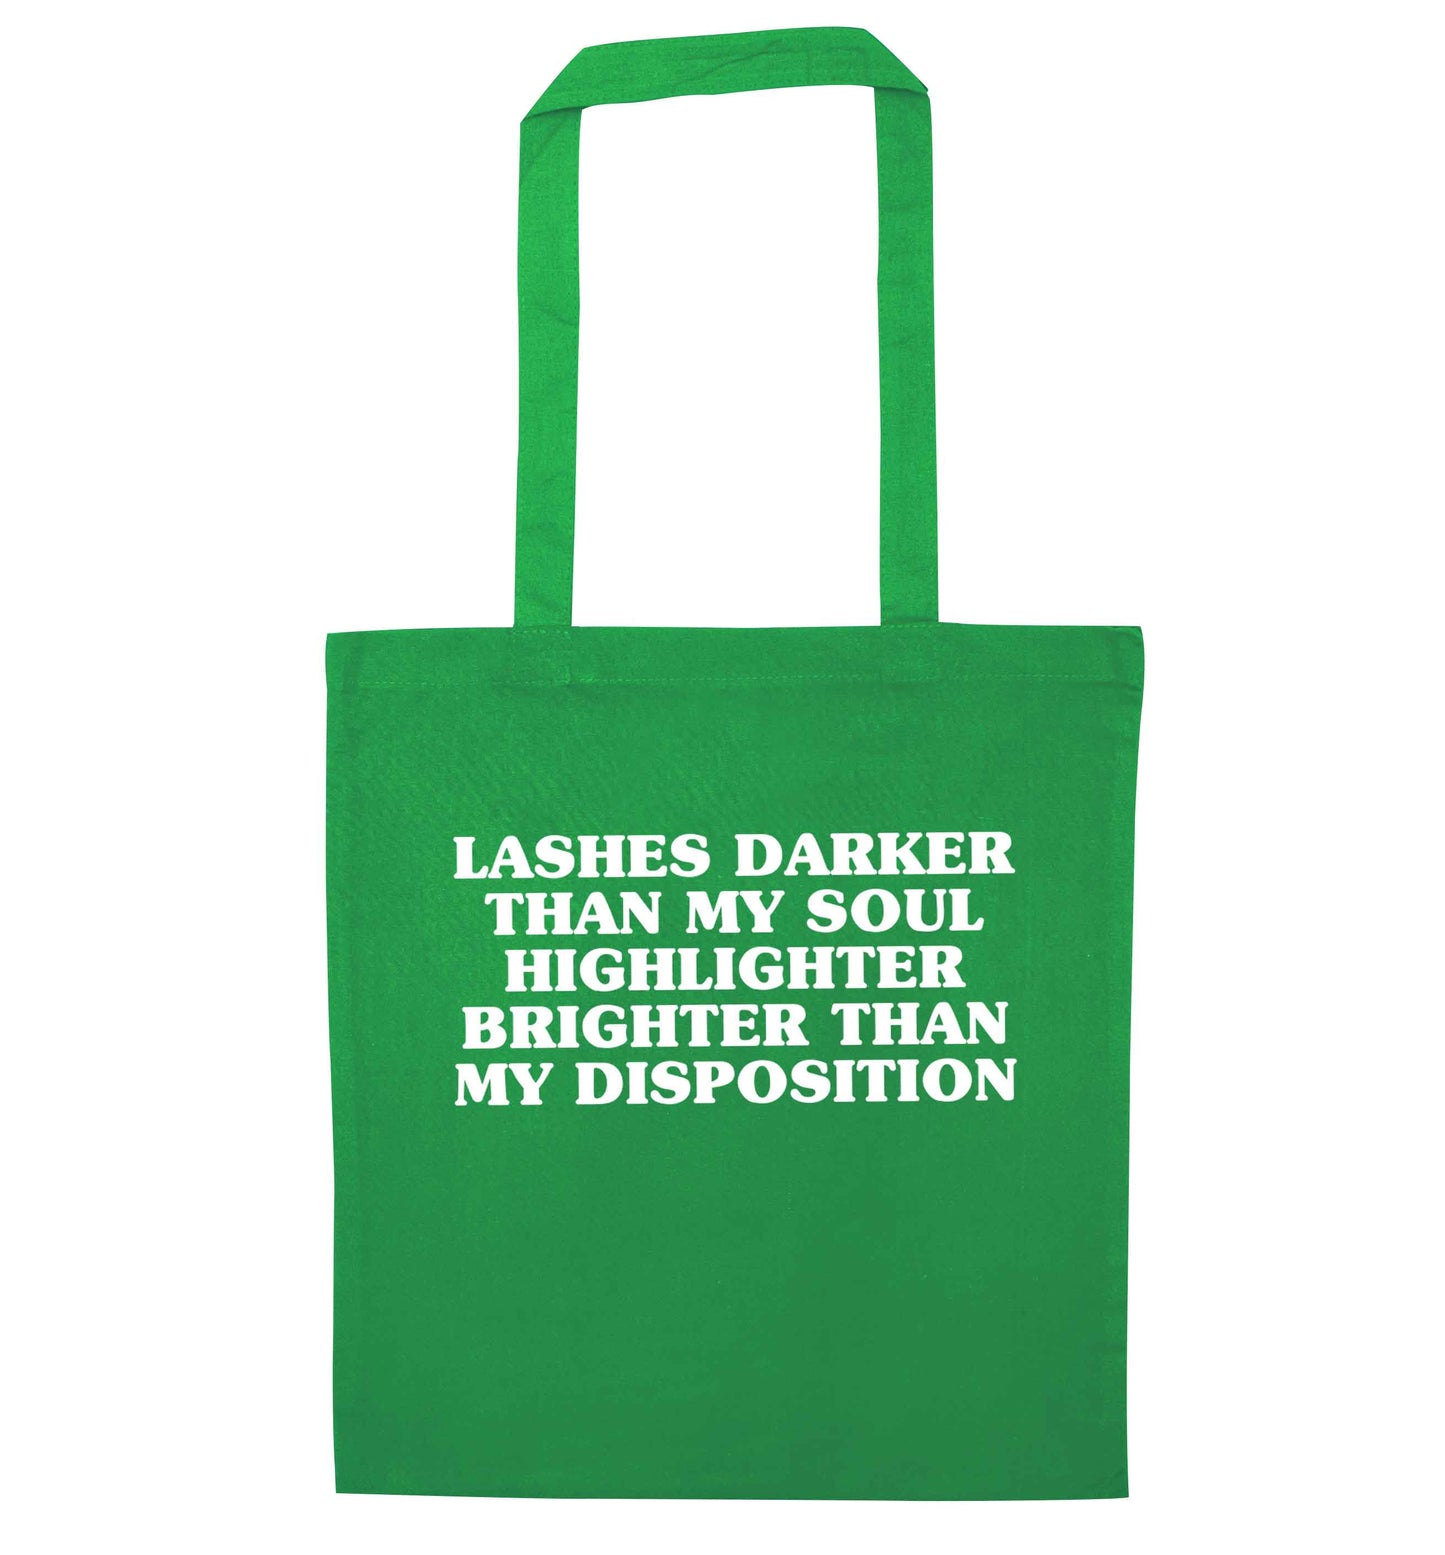 Lashes darker than my soul, highlighter brighter than my disposition green tote bag